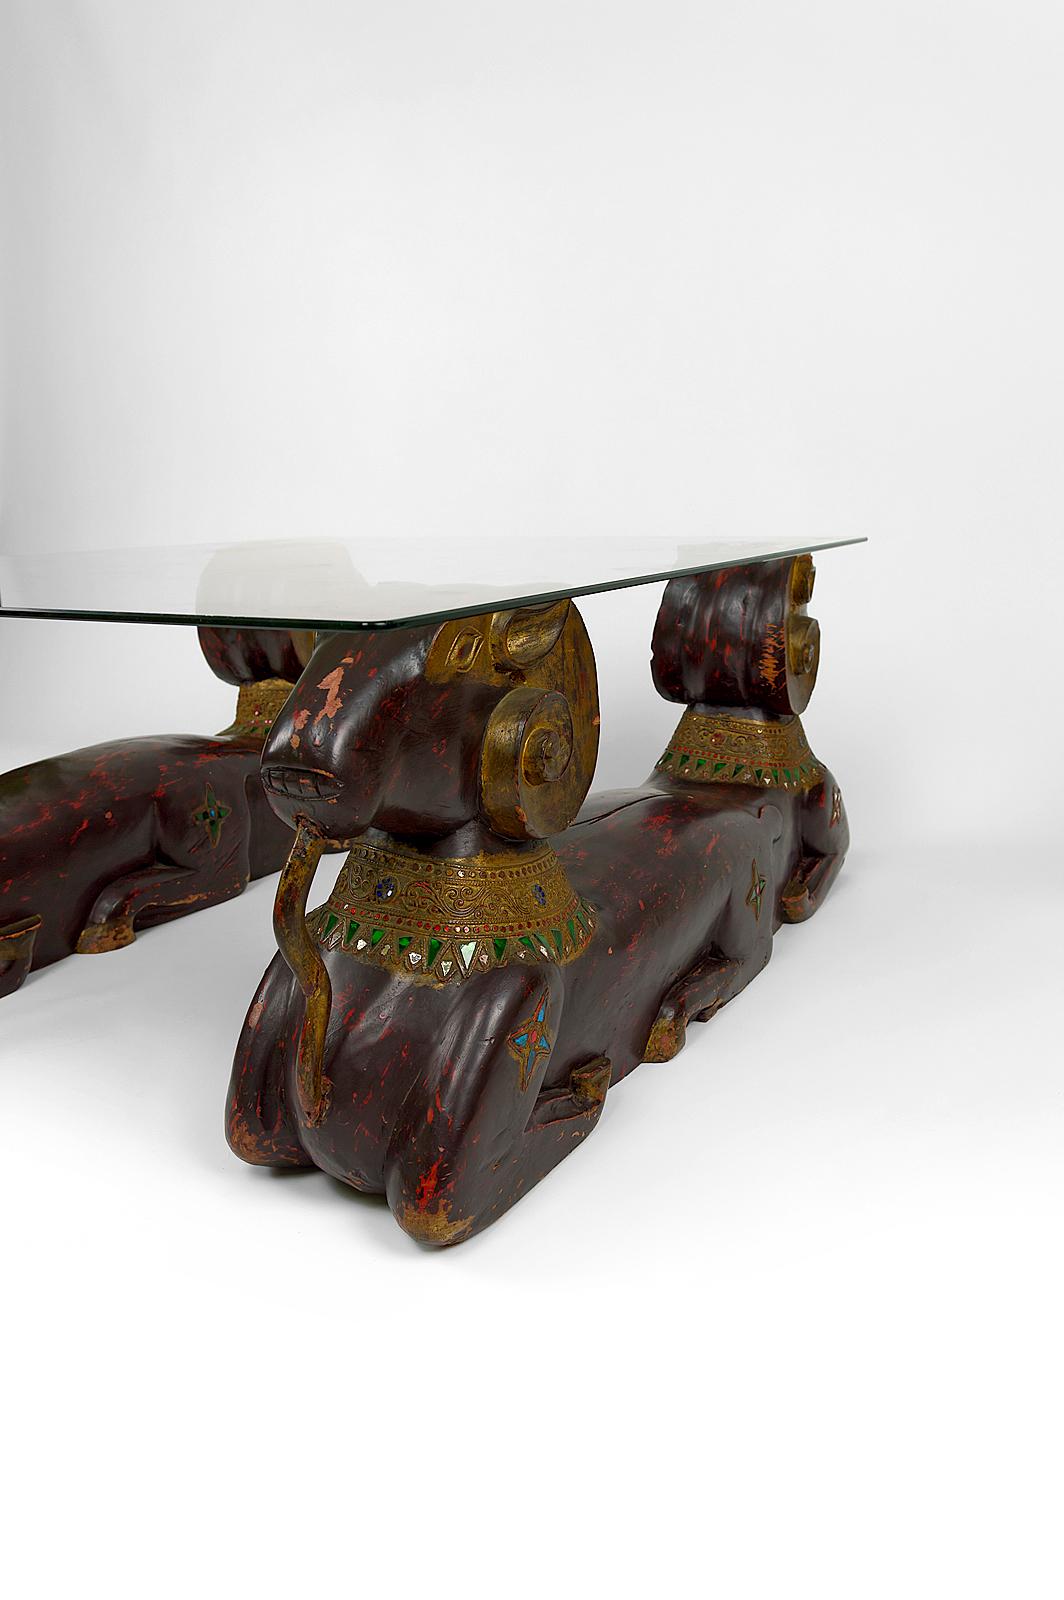 Carved Wood Double Rams Head Coffee Table, Hollywood Regency, circa 1970 For Sale 12